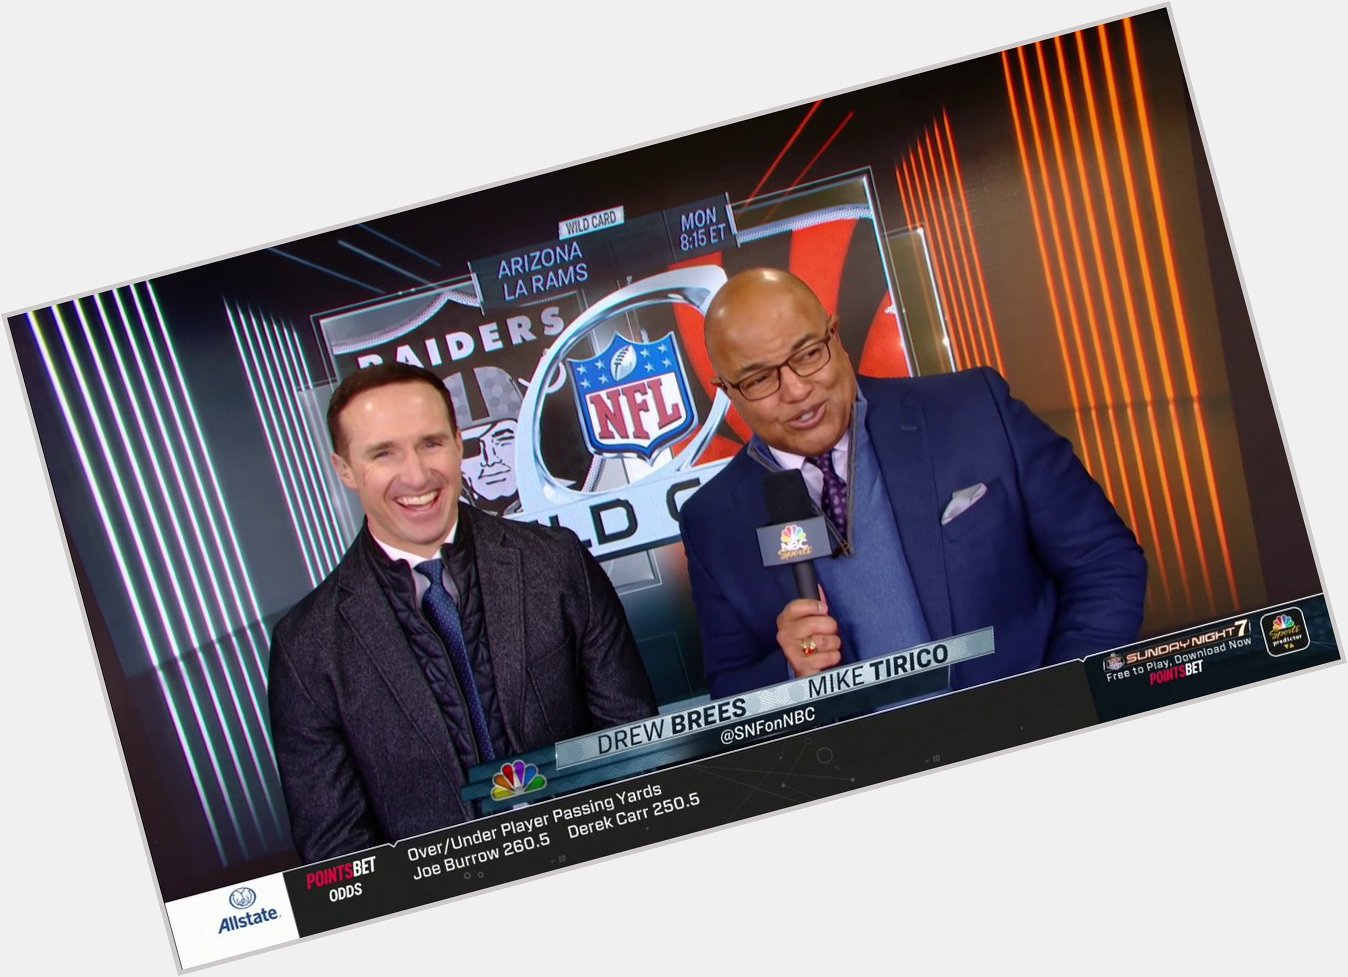 Happy Birthday, Drew Brees! Drew joins in the booth for vs. 